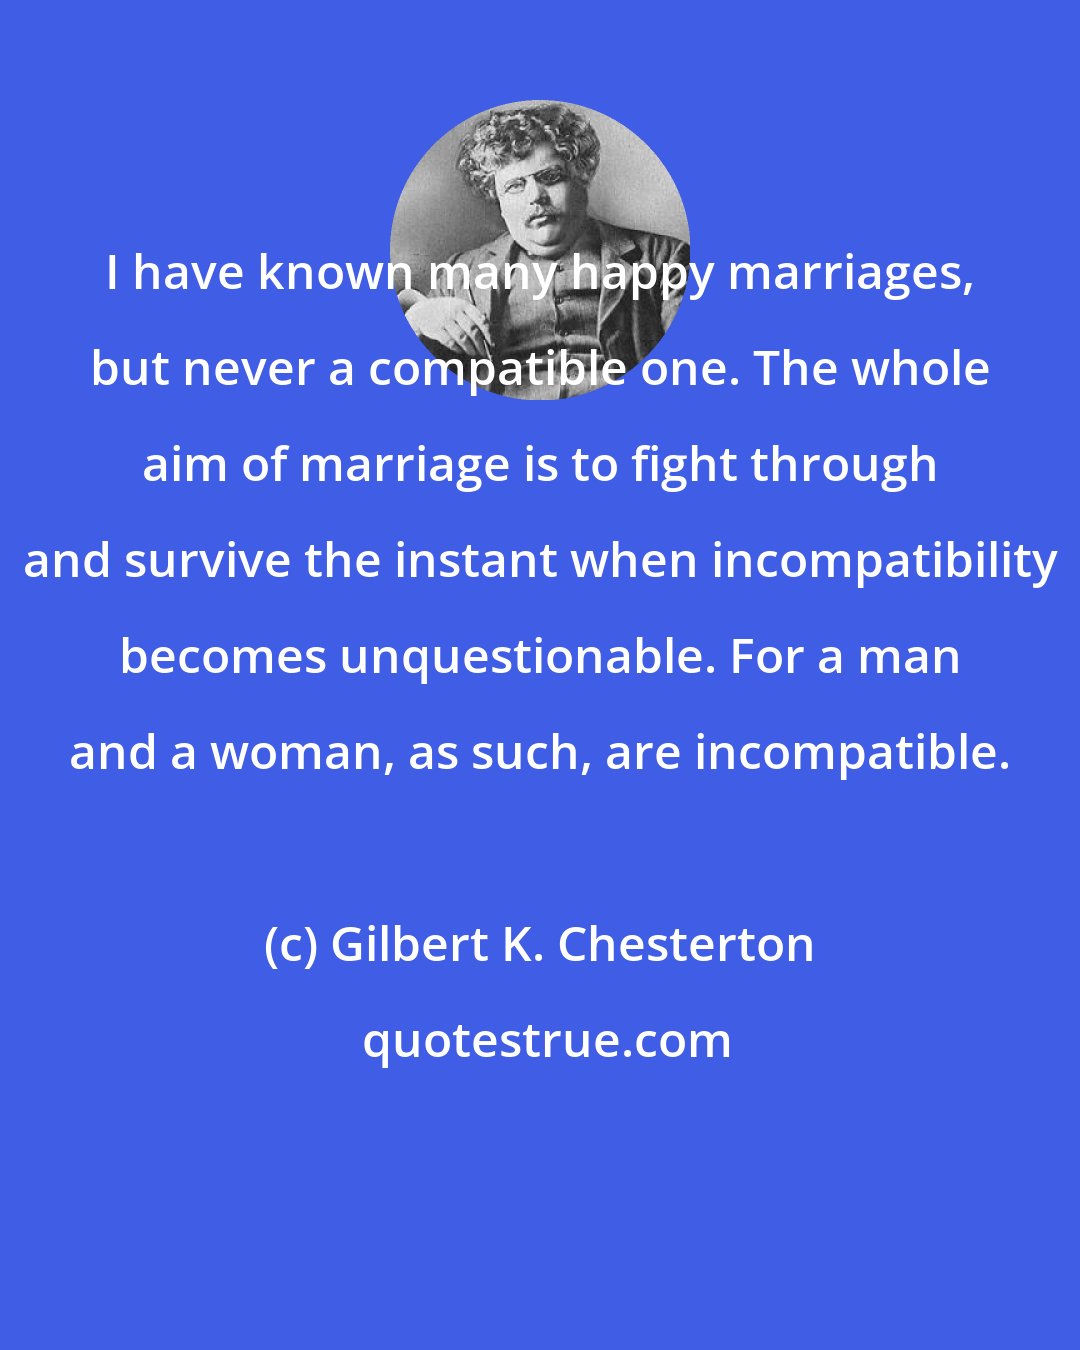 Gilbert K. Chesterton: I have known many happy marriages, but never a compatible one. The whole aim of marriage is to fight through and survive the instant when incompatibility becomes unquestionable. For a man and a woman, as such, are incompatible.